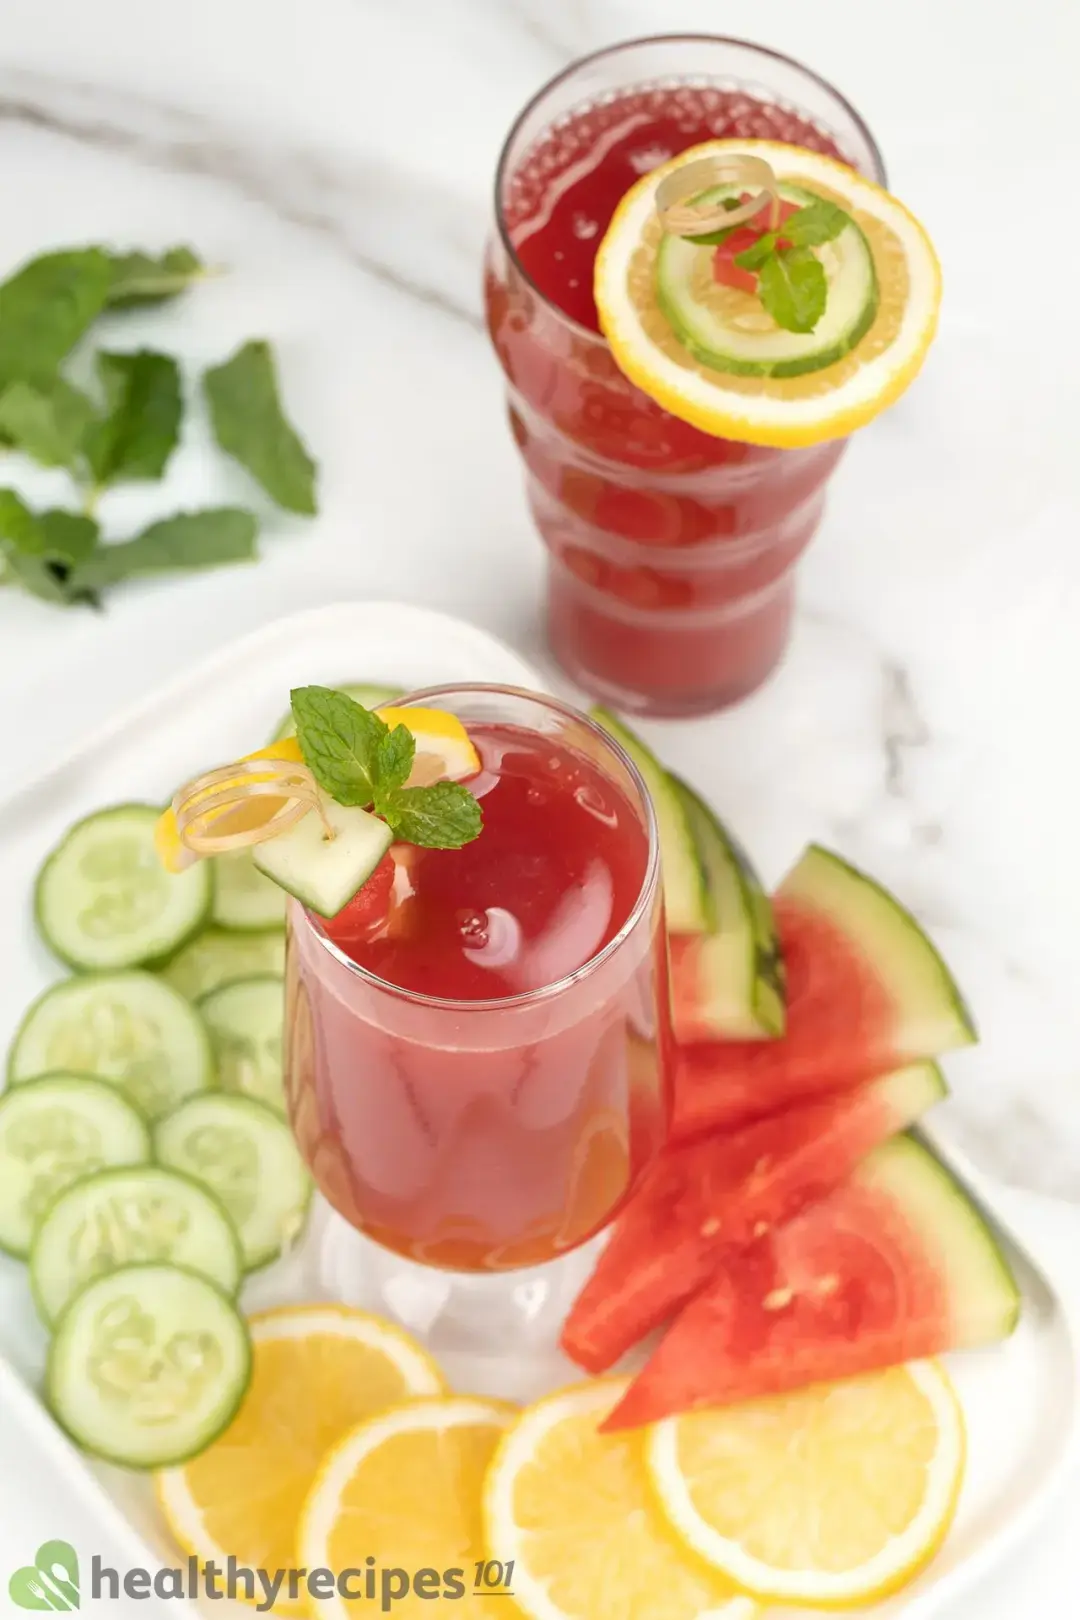 A plate holding a glass of watermelon cucumber juice surrounded by watermelon slices, lemon slices, and cucumber slices